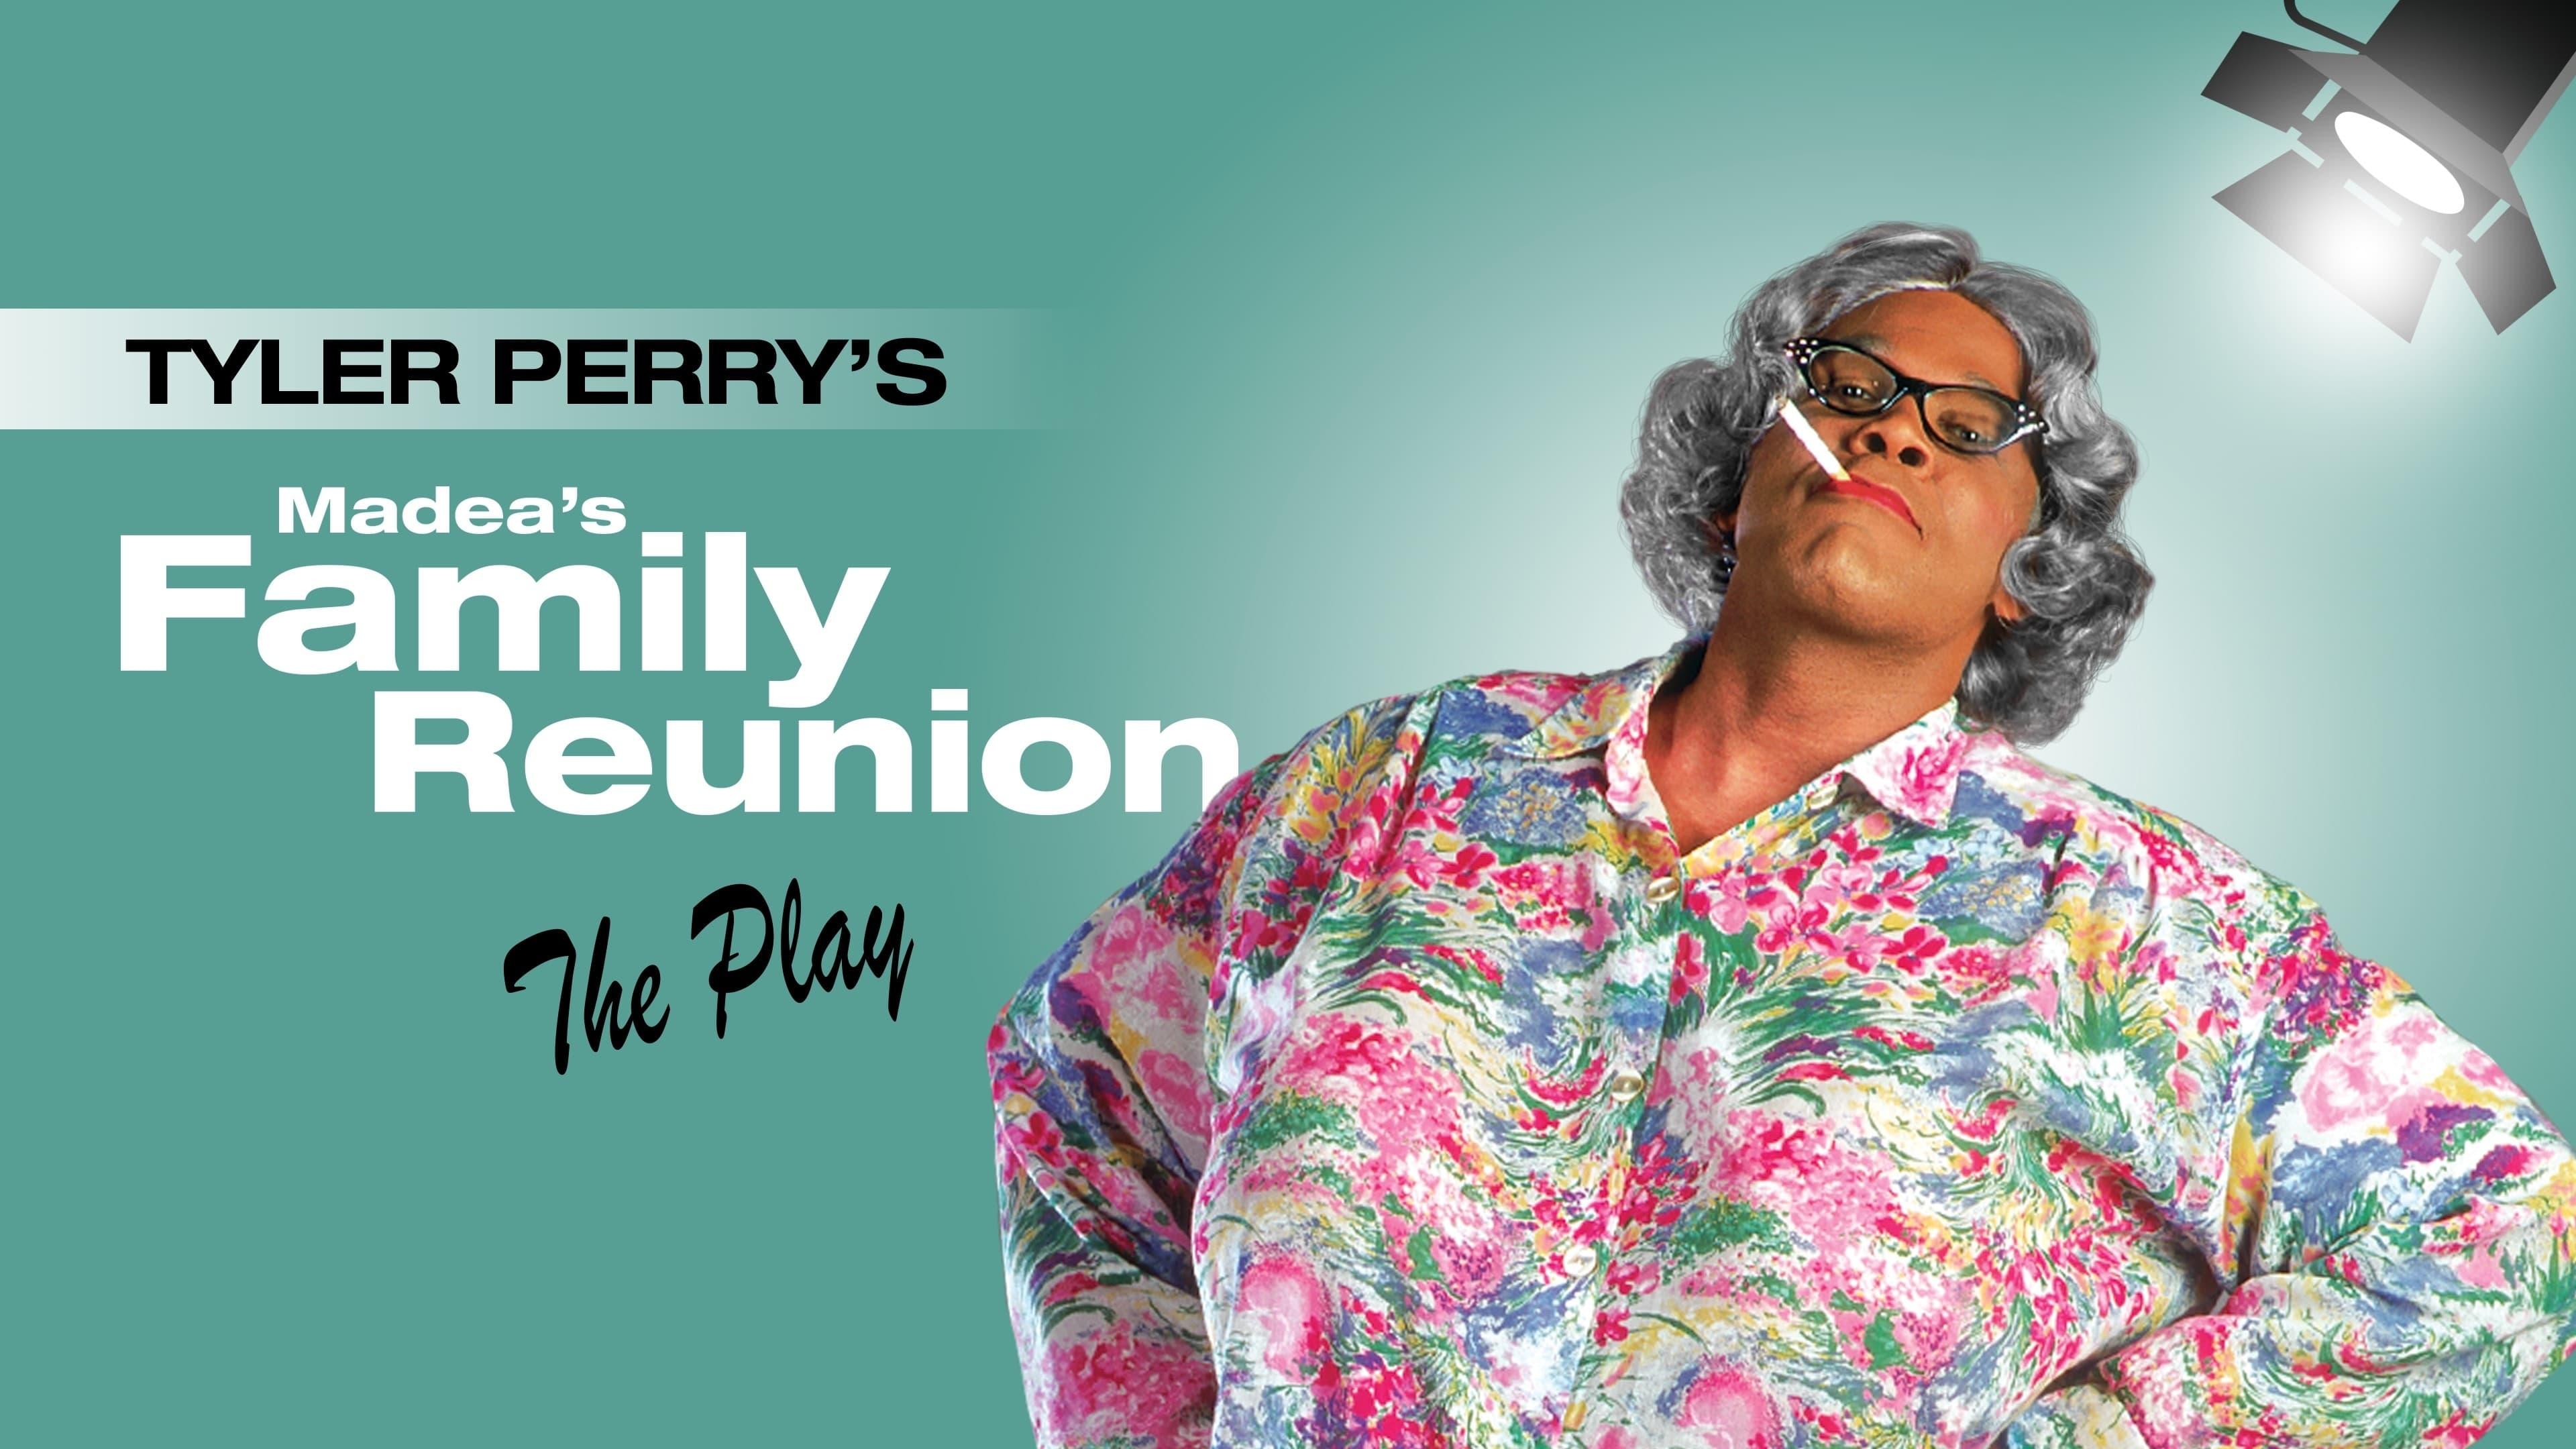 Tyler Perry's Madea's Family Reunion - The Play backdrop